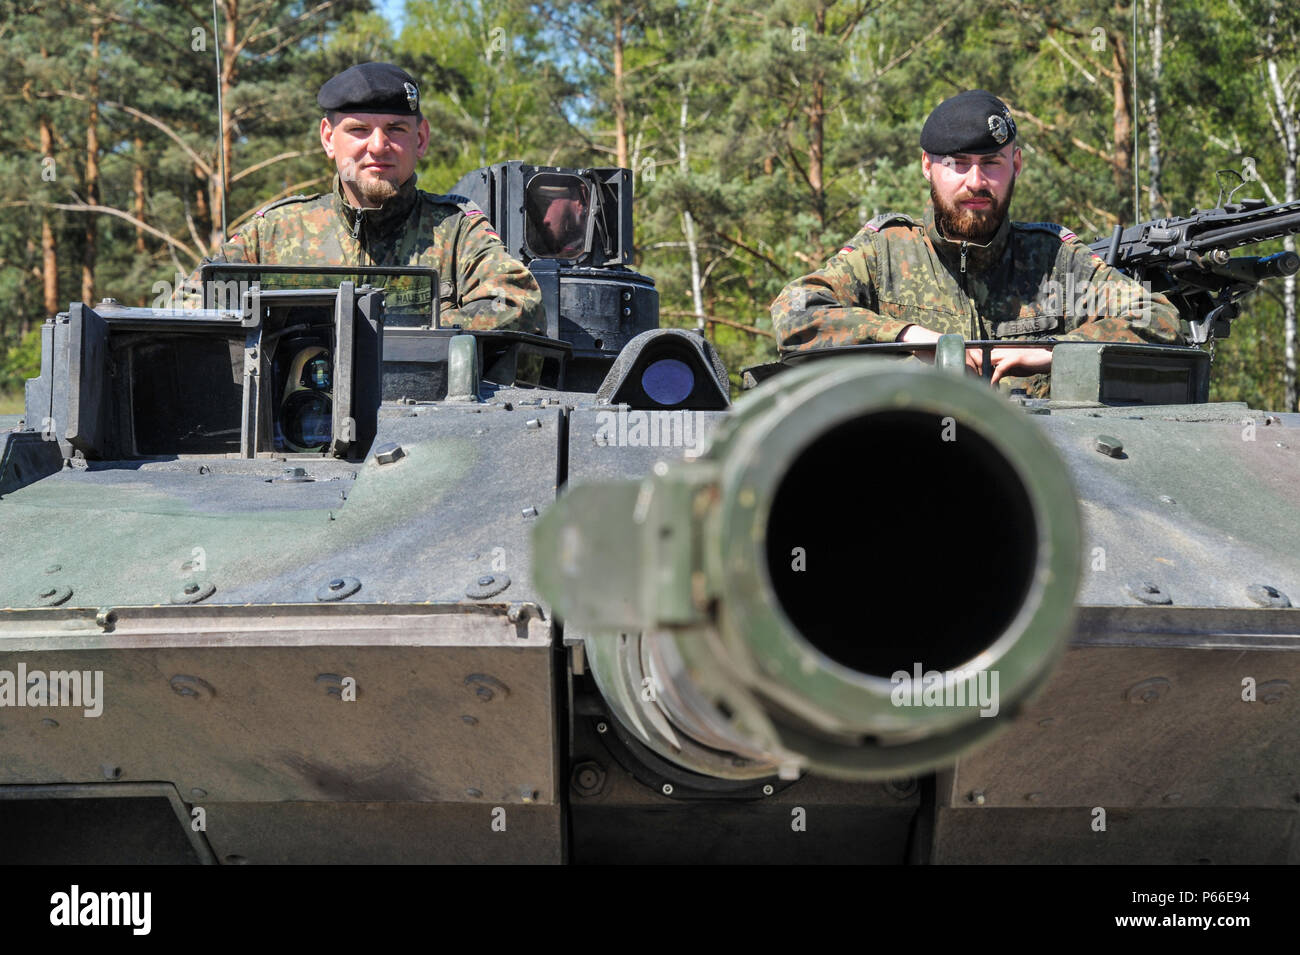 Photo shows Soldiers from Germany participating in the Strong Europe Tank Challenge (SETC) May 08, 2016 at Grafenwoehr Training Area, Germany. The SETC is co-hosted by U.S. Army Europe and the German Bundeswehr May 10-13, 2016. The competition is designed to foster military partnership while promoting NATO interoperability. Seven platoons from six NATO nations are competing in SETC - the first multinational tank challenge at Grafenwoehr in 25 years. For more photos, videos and stories from the Strong Europe Tank Challenge, go to http://www.eur.army.mil/tankchallenge/ (U.S. Army photo by Visual Stock Photo